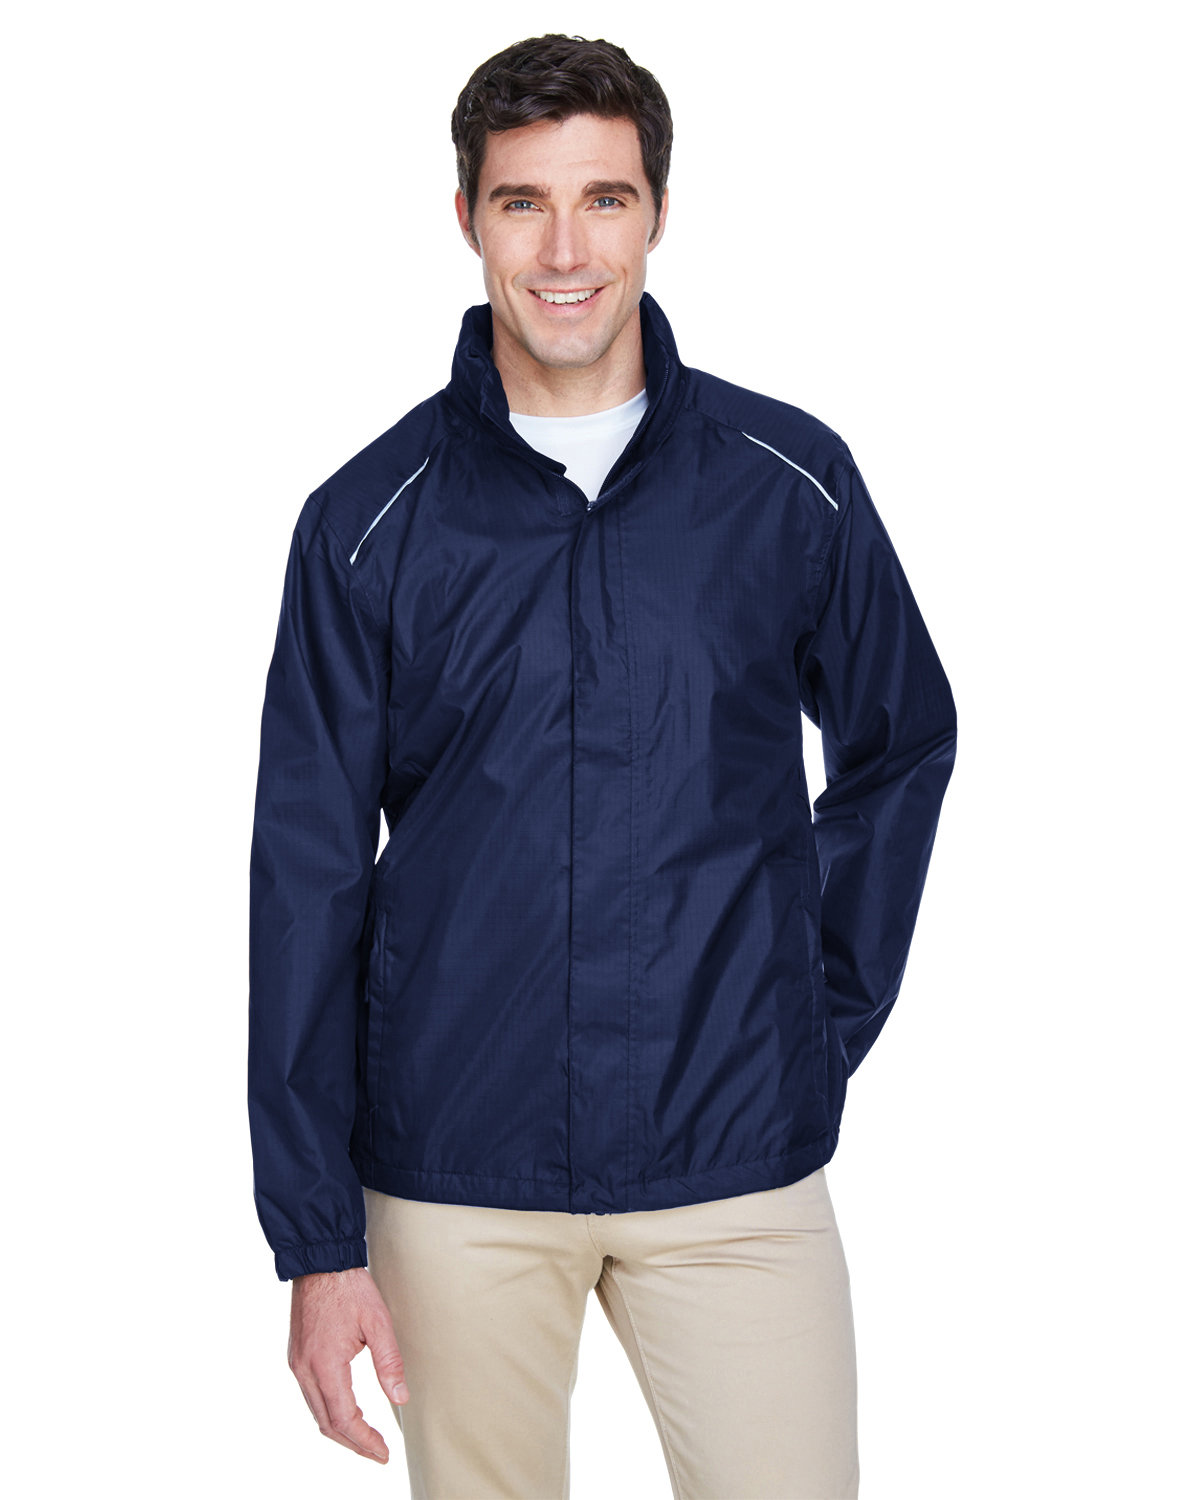 Core 365 Men's Climate Seam-Sealed Lightweight Variegated Ripstop Jacket CLASSIC NAVY 